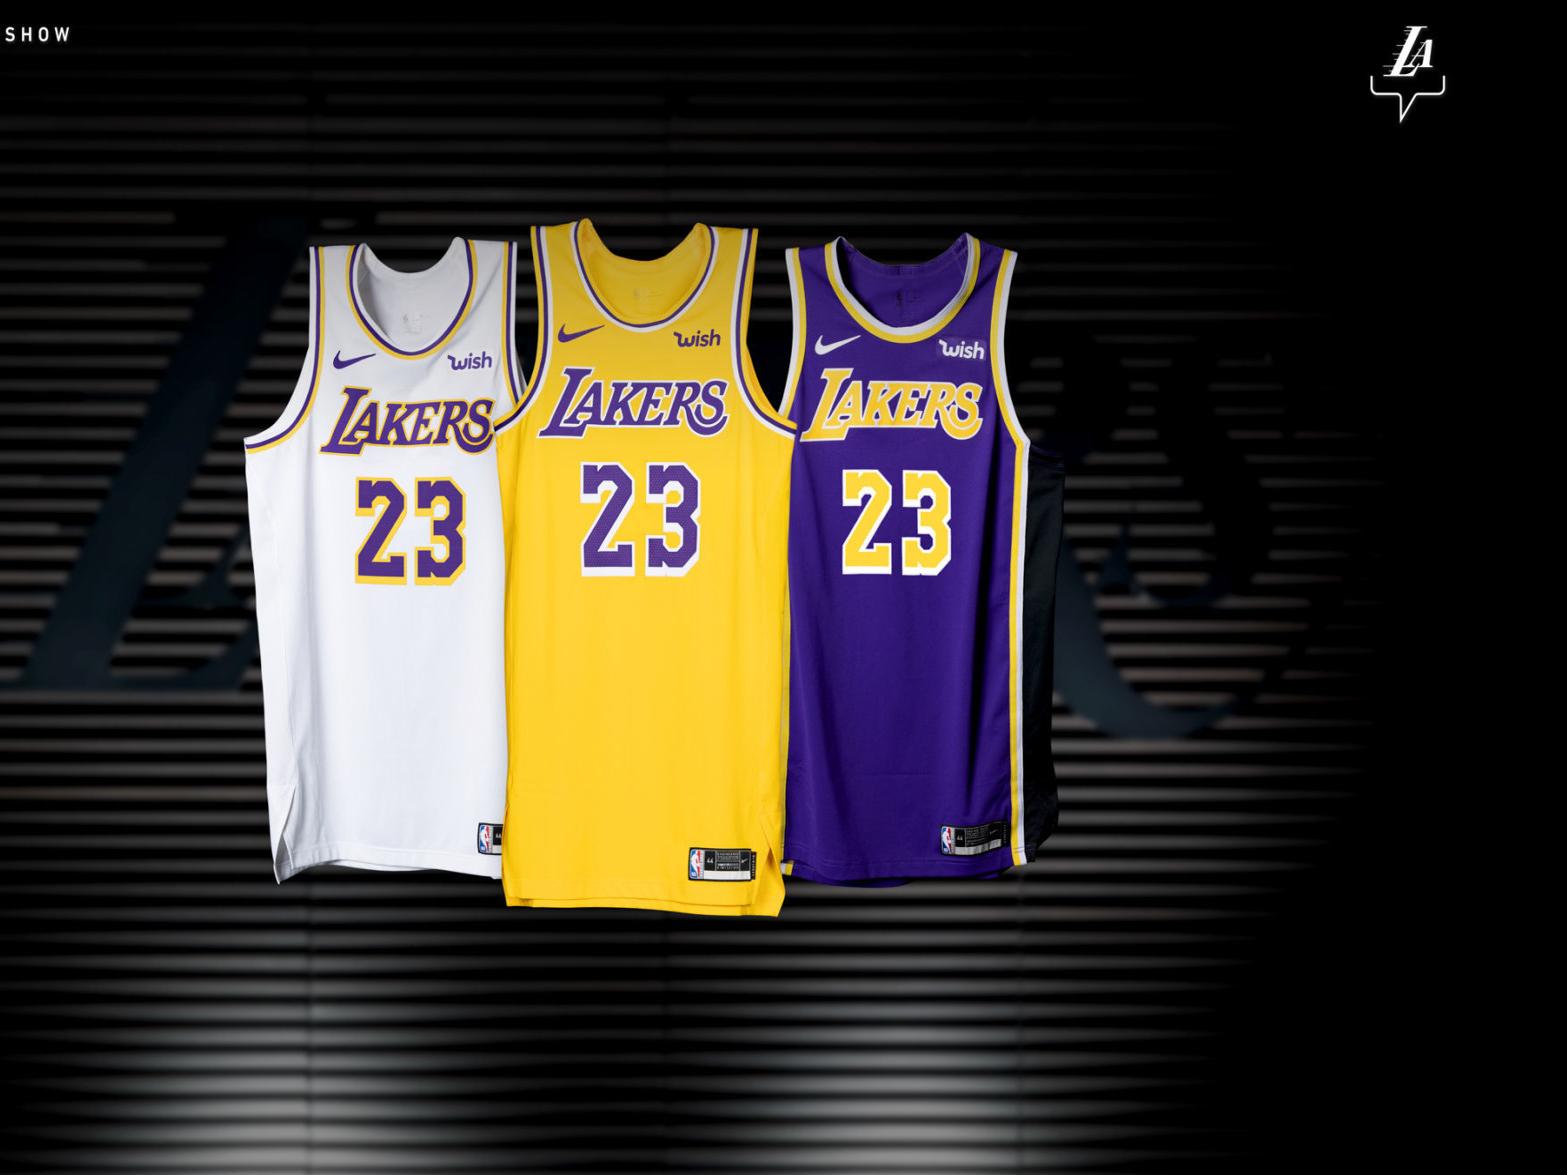 Los Angeles Lakers unveil new jersey design